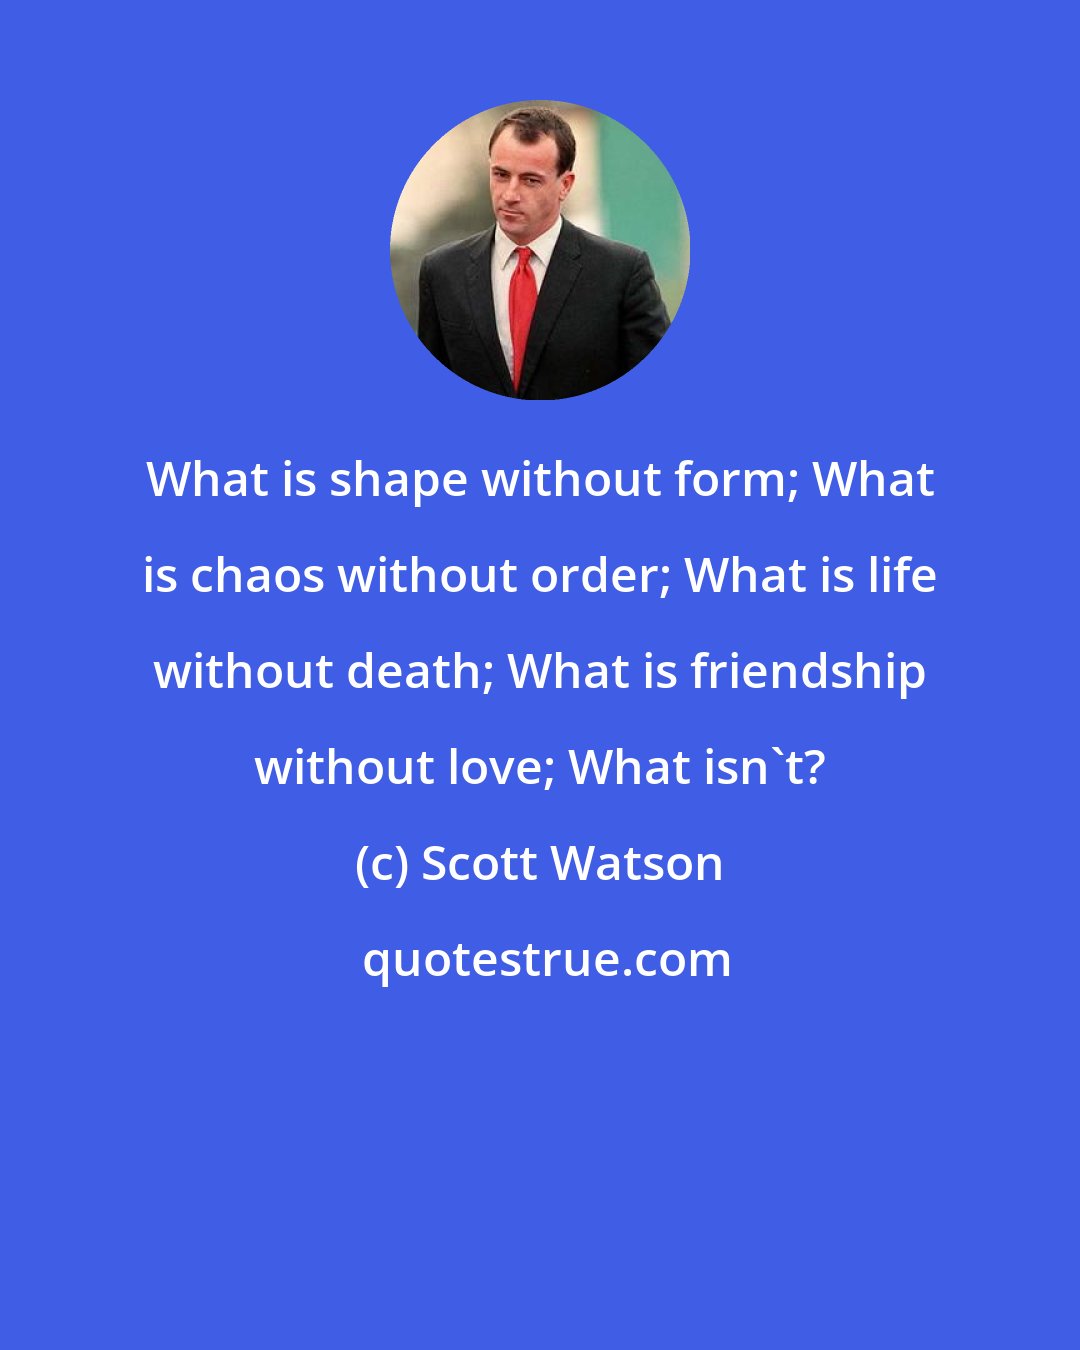 Scott Watson: What is shape without form; What is chaos without order; What is life without death; What is friendship without love; What isn't?